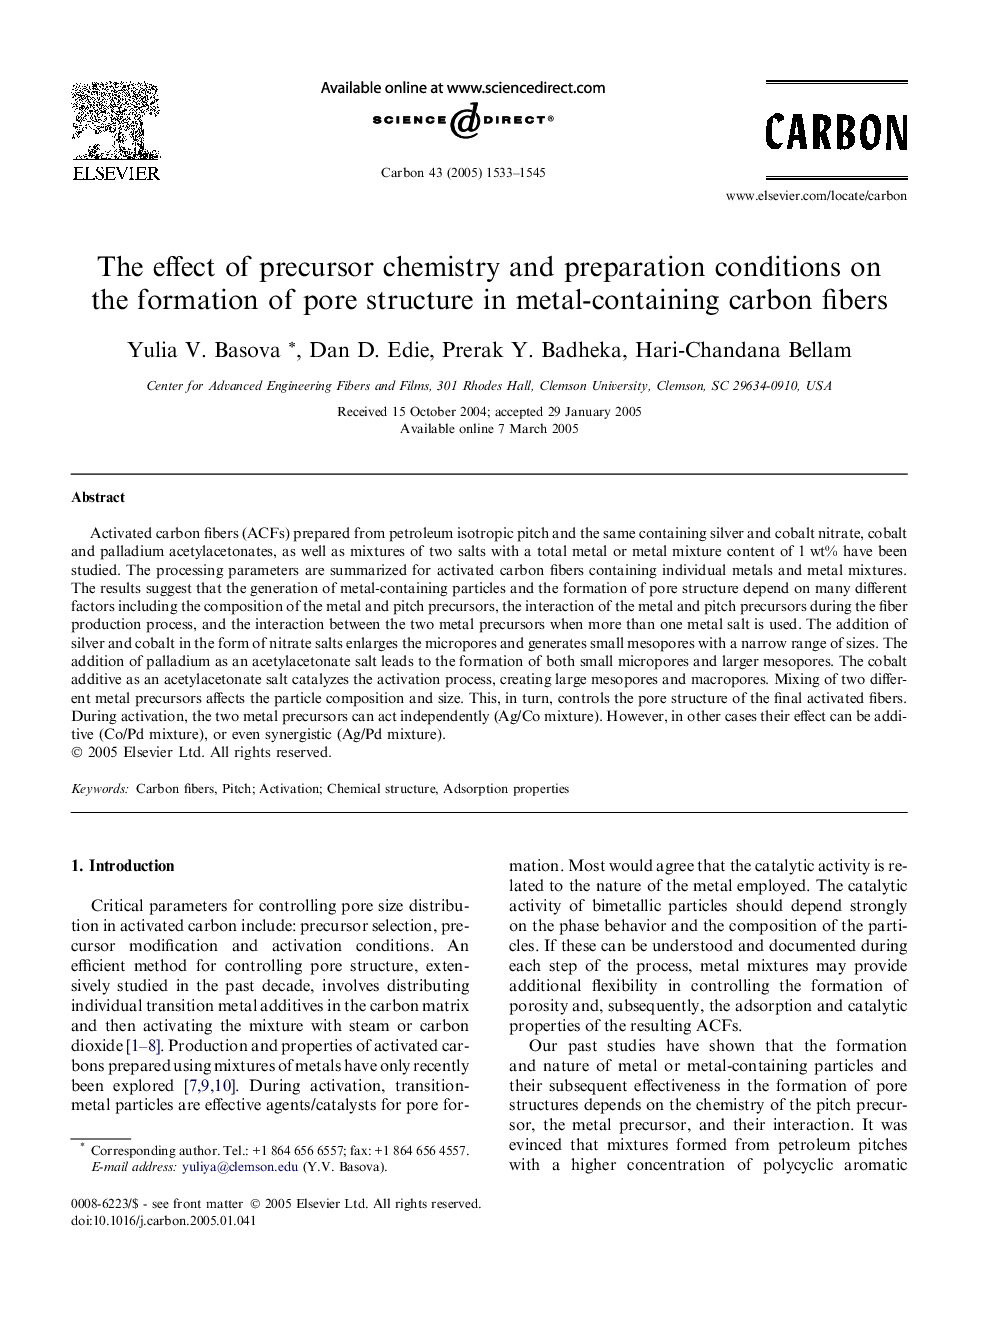 The effect of precursor chemistry and preparation conditions on the formation of pore structure in metal-containing carbon fibers